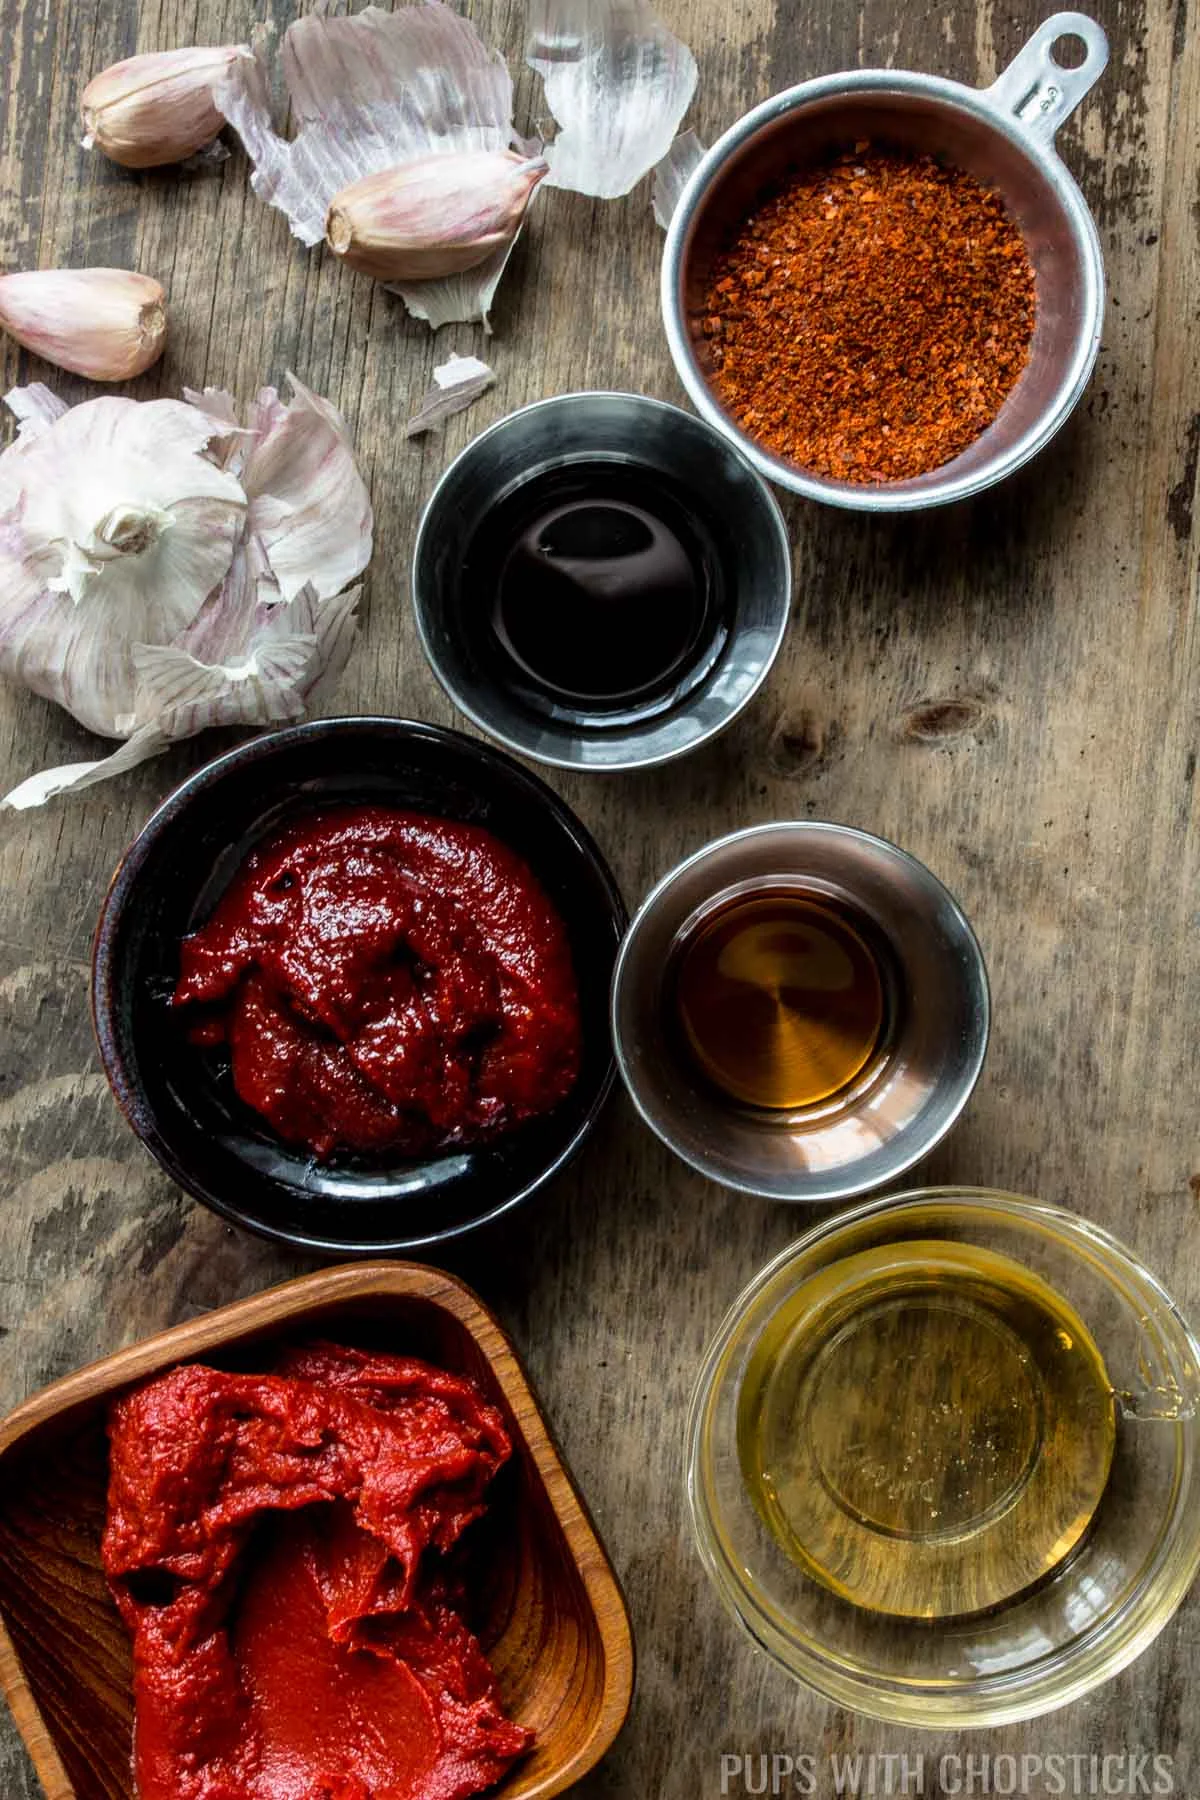 Ingredients for Sweet and Spicy Gochujang sauce (tomato paste, gochujang, honey, sesame oil, soy sauce, garlic, chilli flakes)